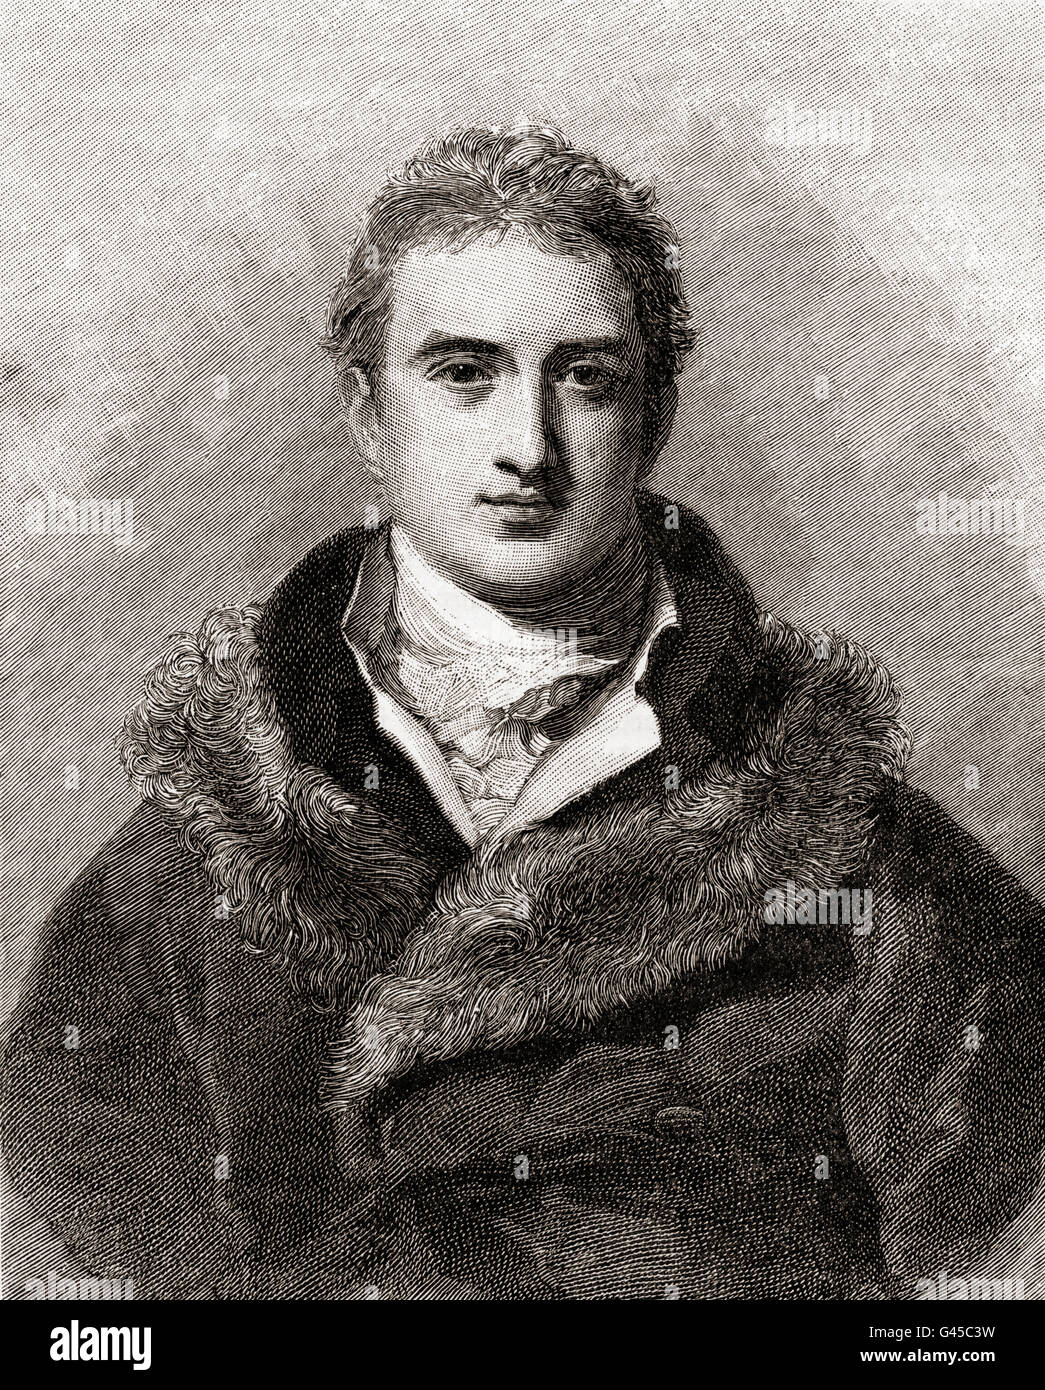 Robert Stewart, 2nd Marquess of Londonderry, 1769 – 1822, aka Lord Castlereagh.  Irish-British statesman and  Secretary of State for Foreign Affairs. Stock Photo